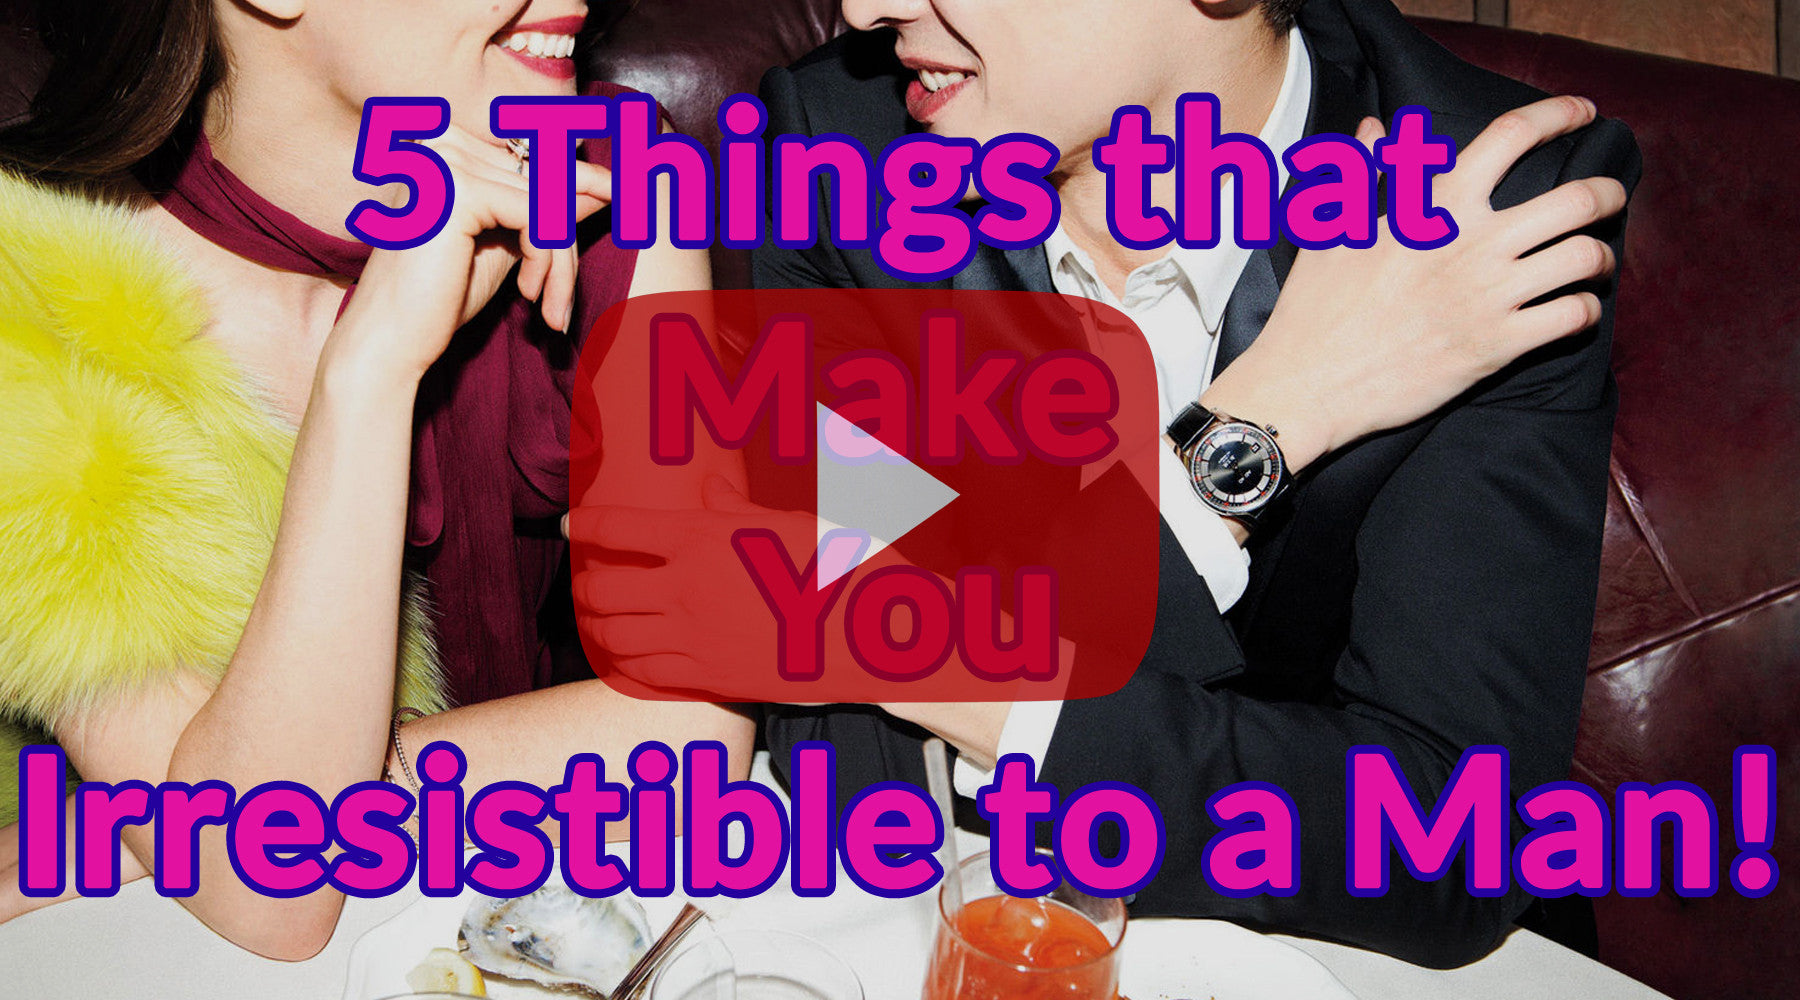 5 Things that Make You Irresistible to a Man! - Dating Advice